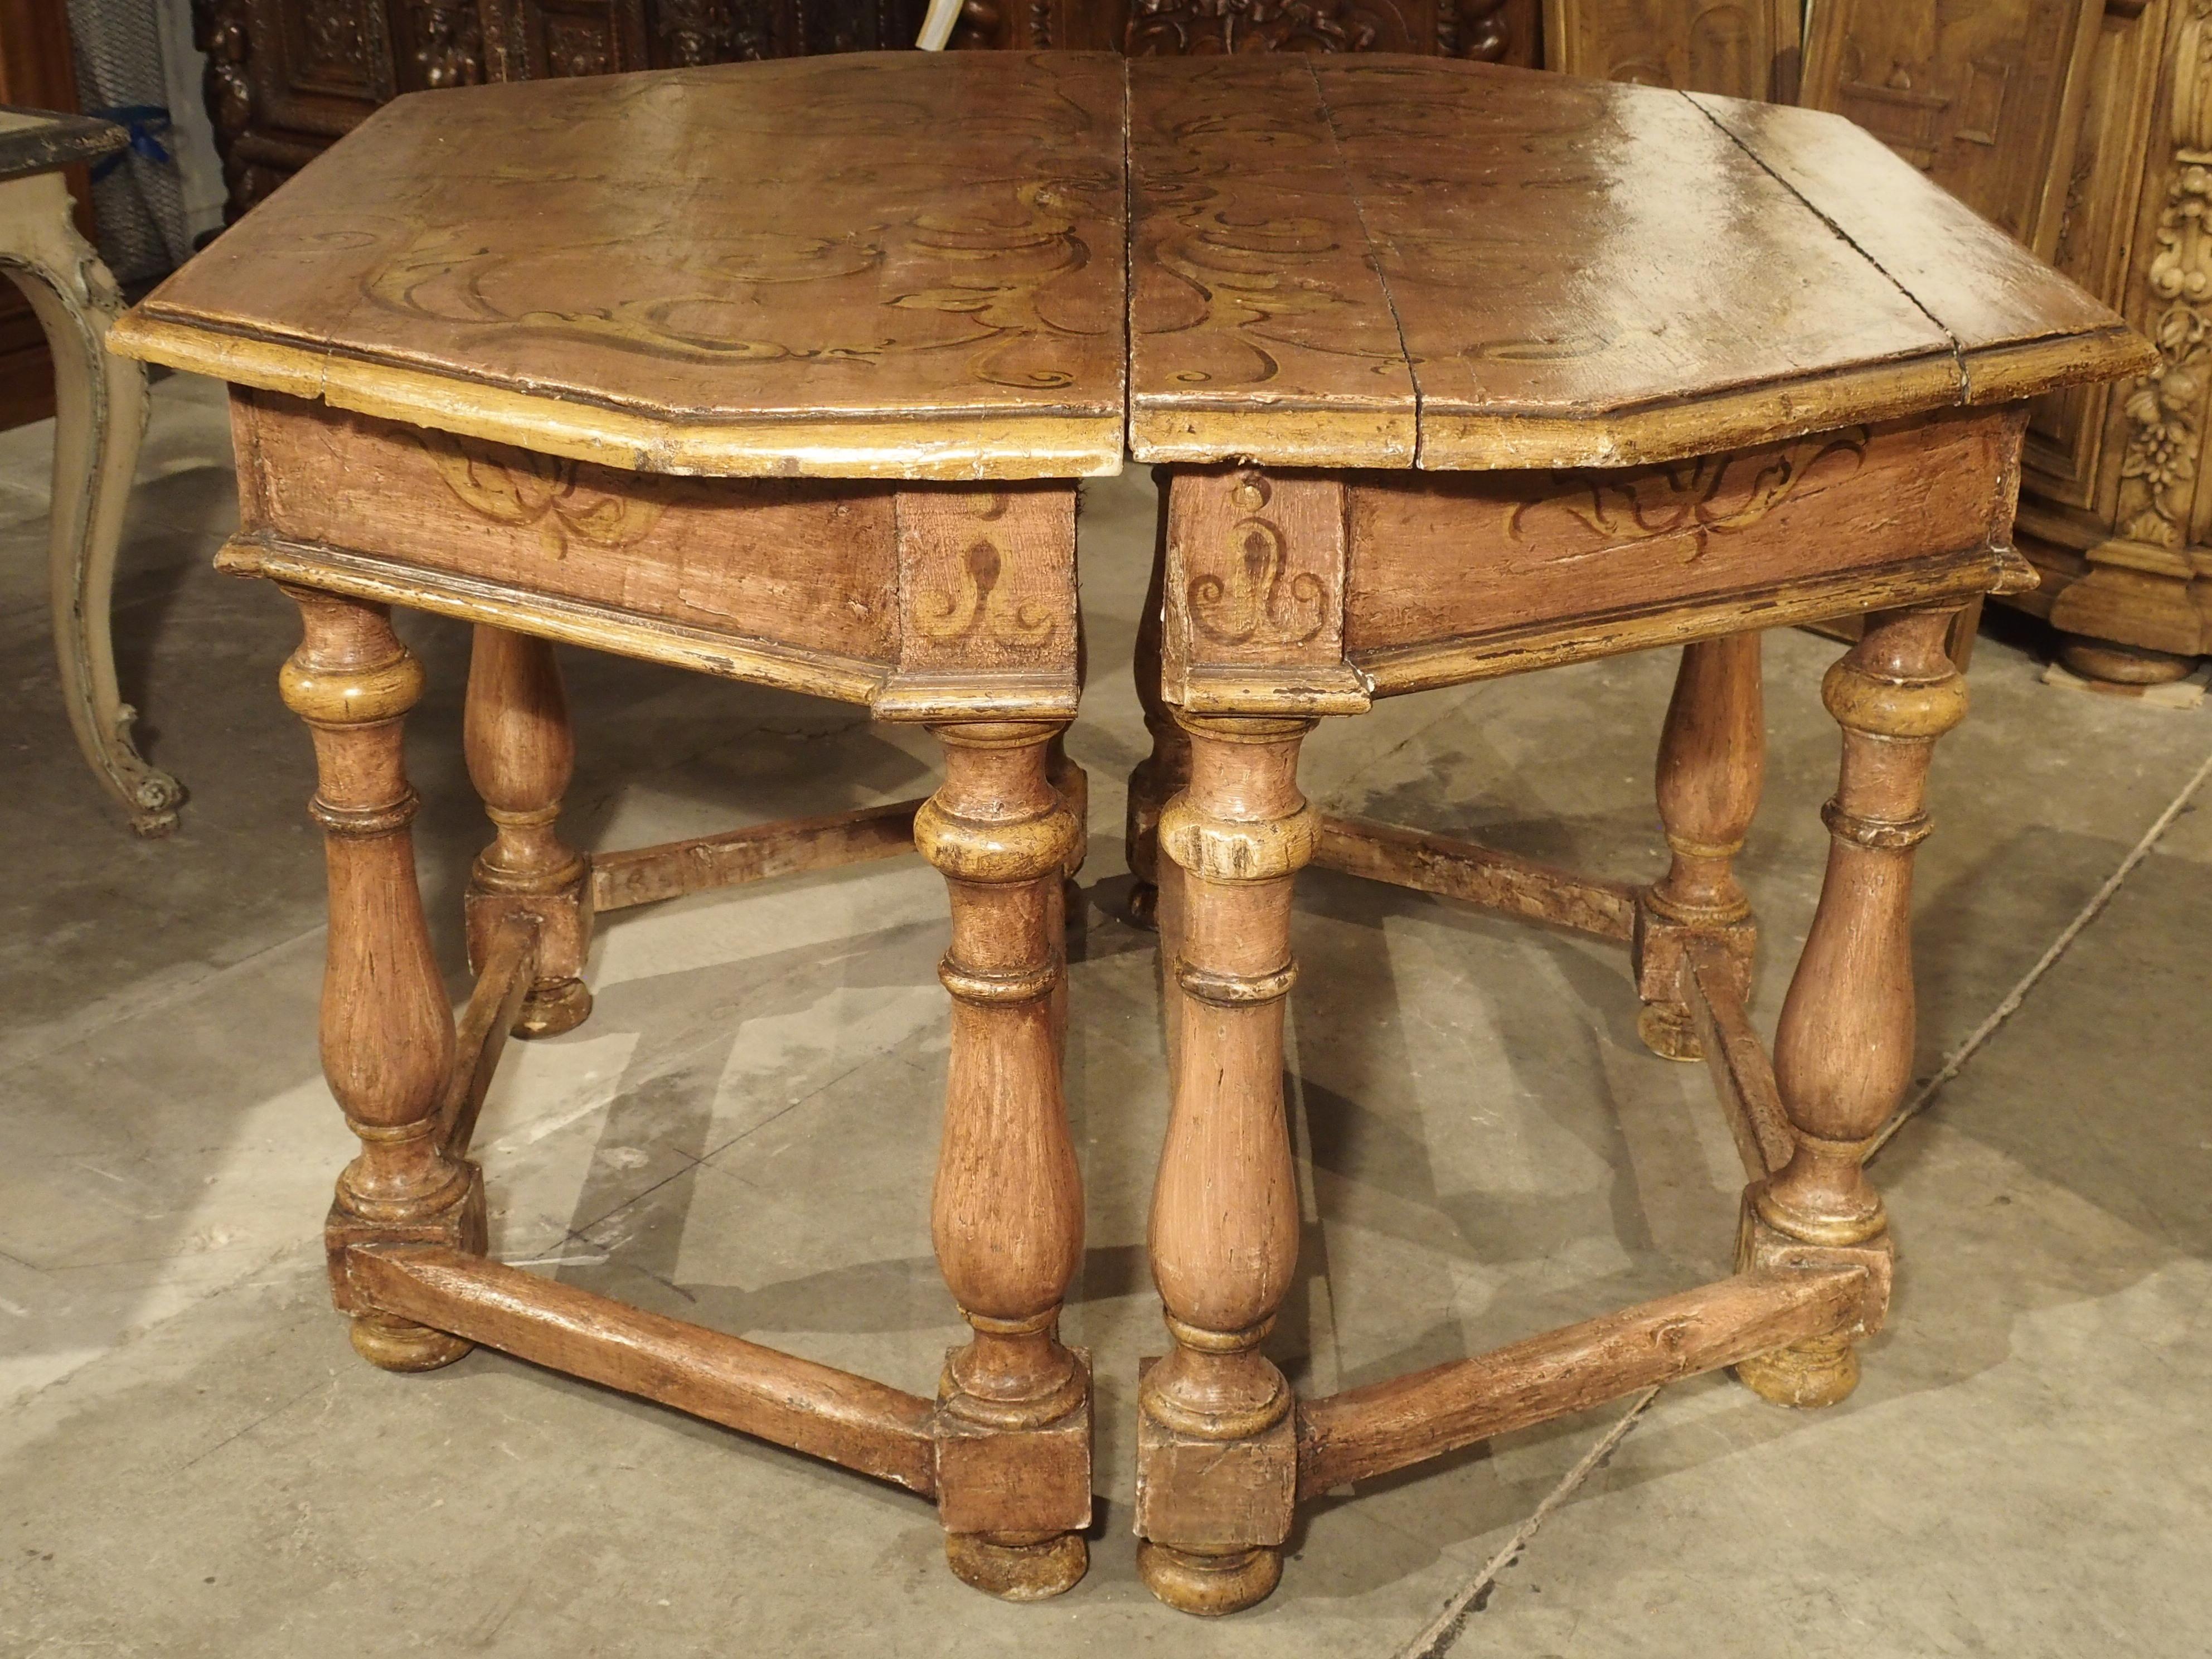 Hand-Painted Pair of Antique Painted Console Tables from Northern Italy, circa 1800 For Sale